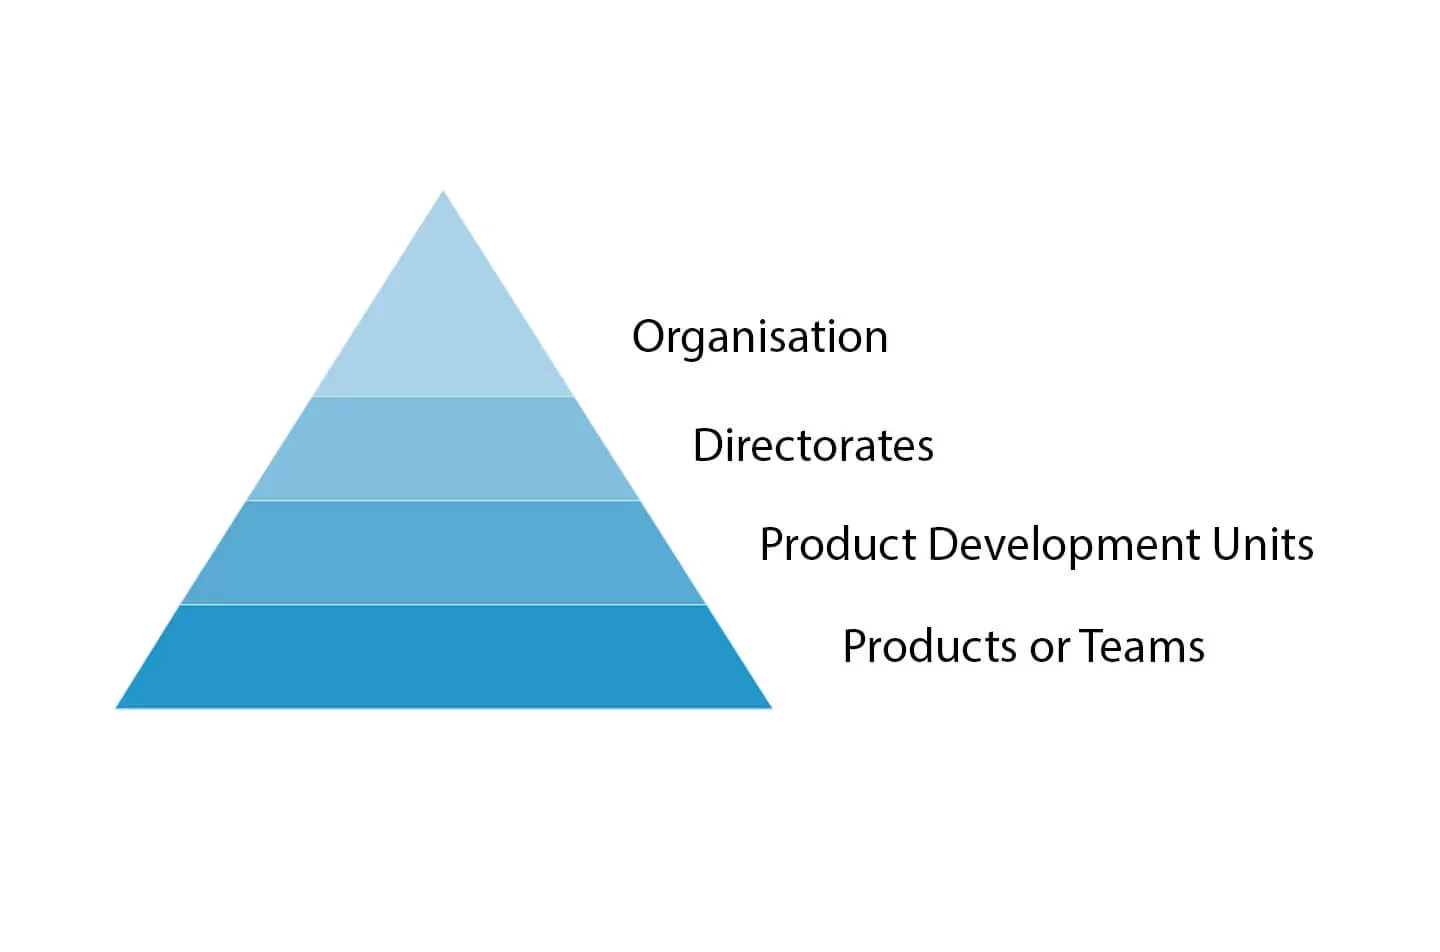 A pyramid with 4 tiers, labelled from bottom to top as: products or teams, product development units, directorates, organisation.